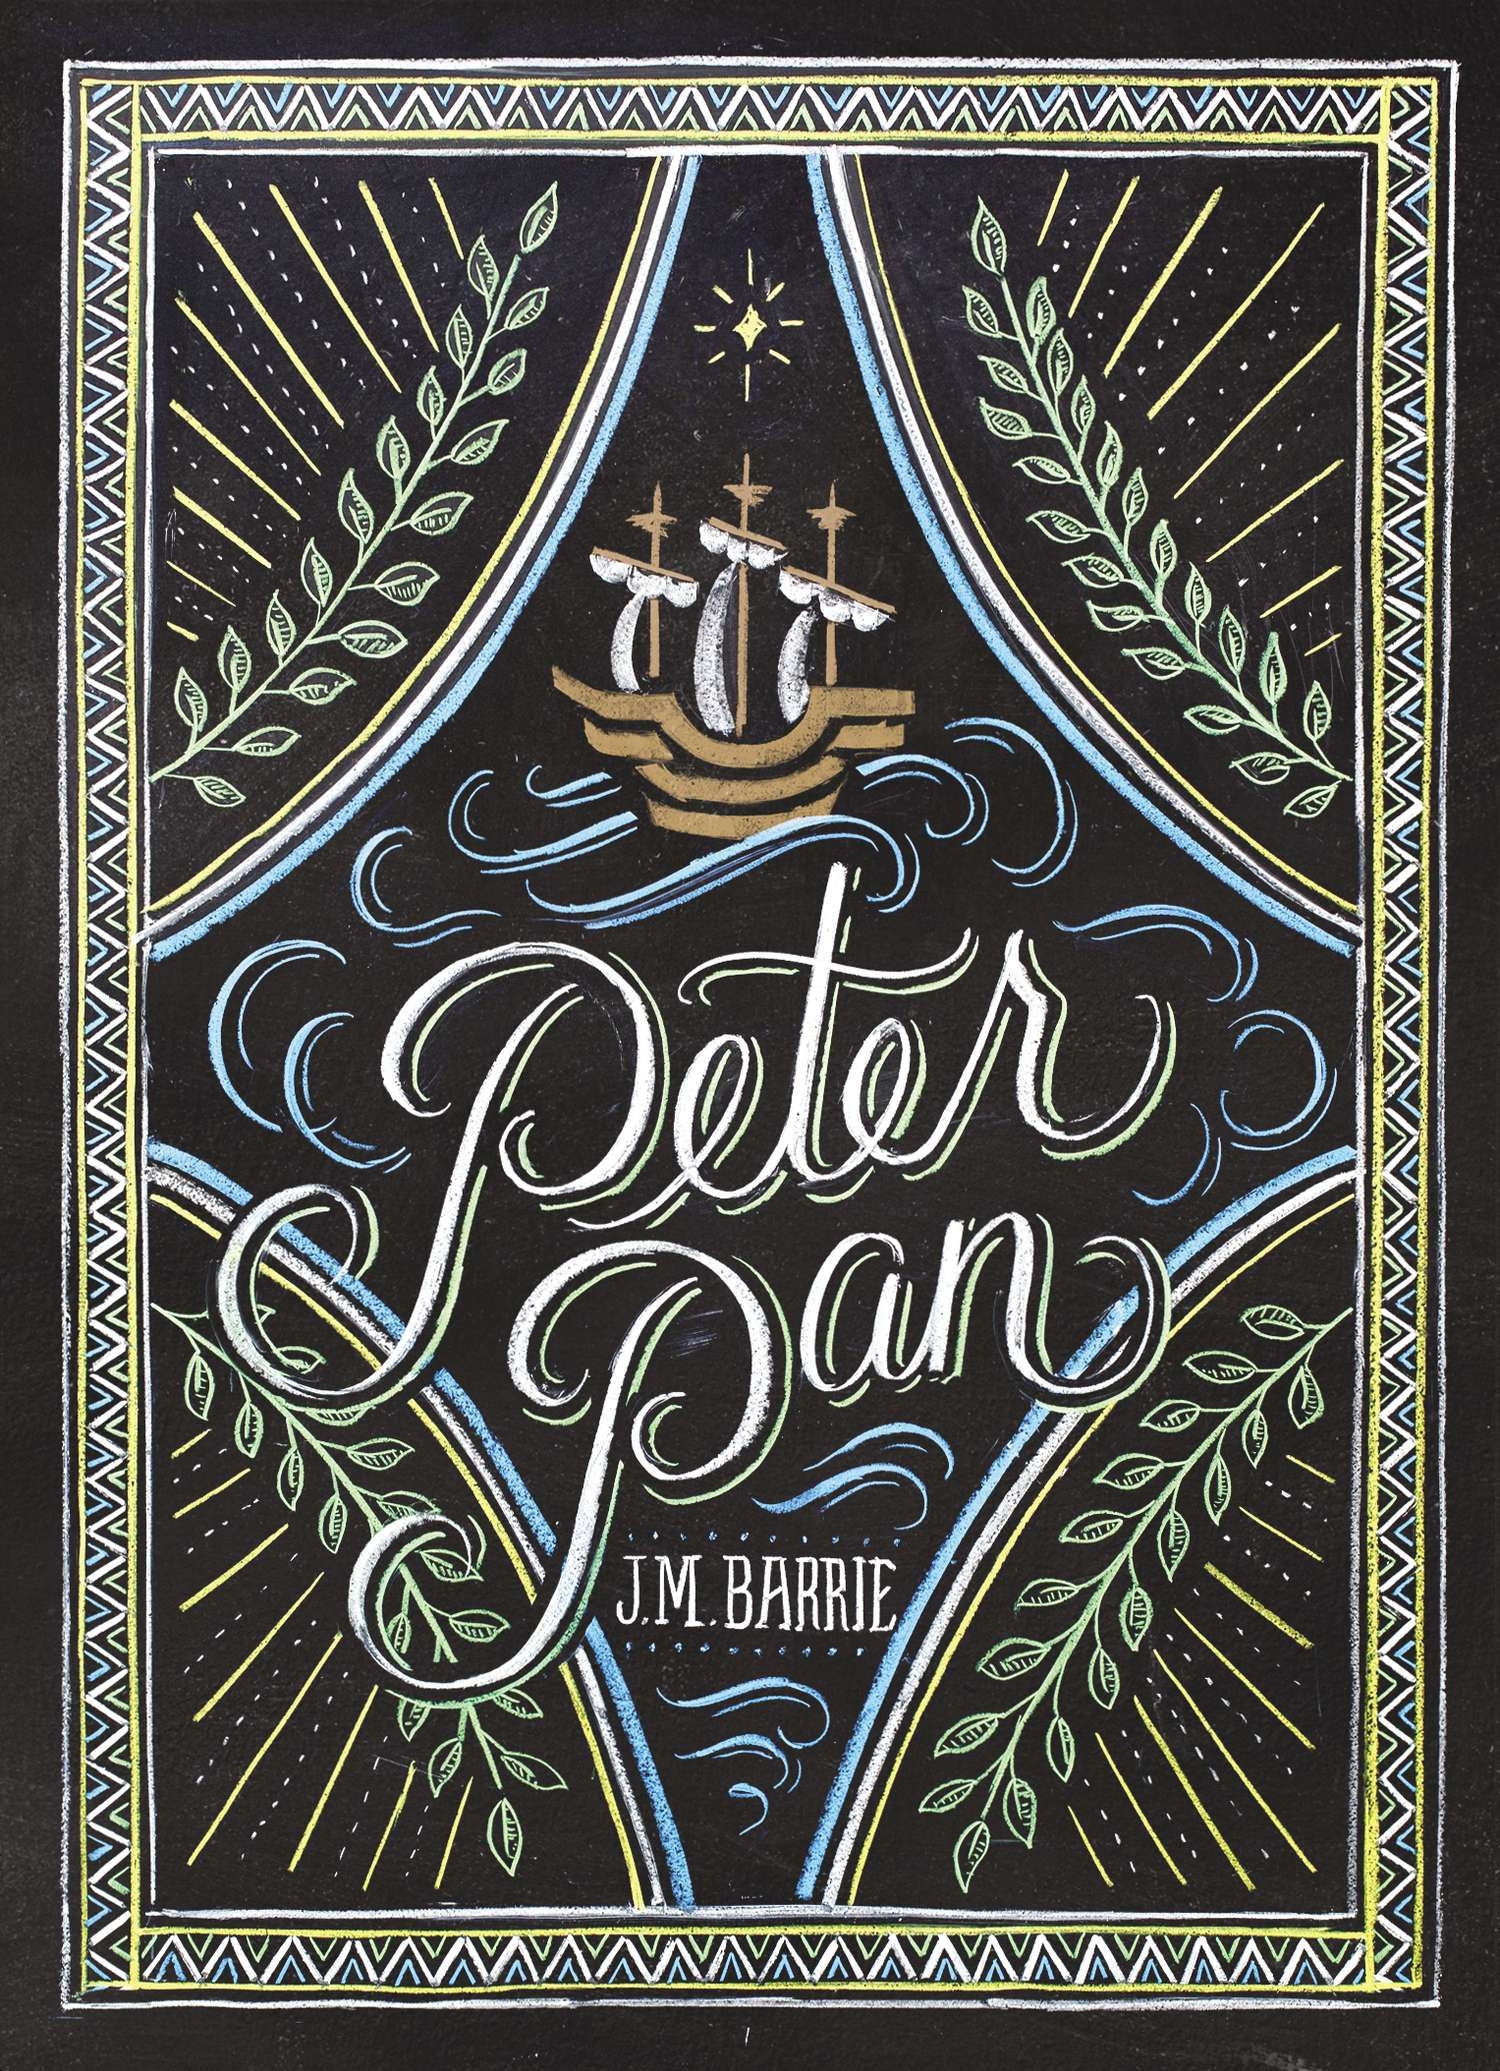 Peter Pan by J. M. Barrie - Penguin Books New Zealand